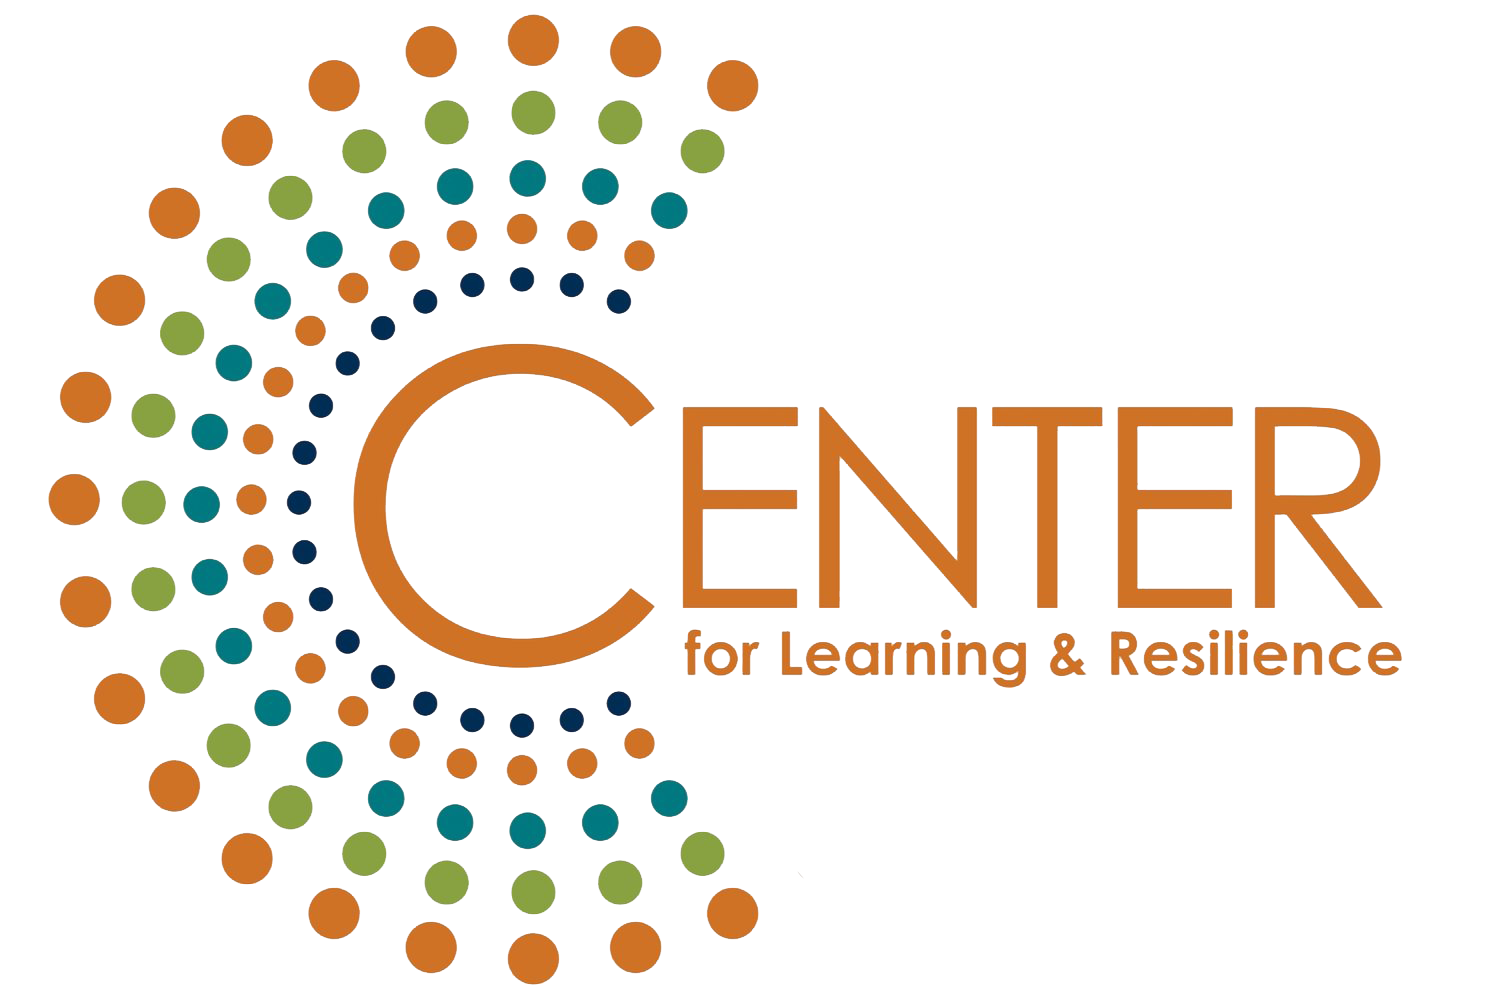 The Center for Learning &amp; Resilience